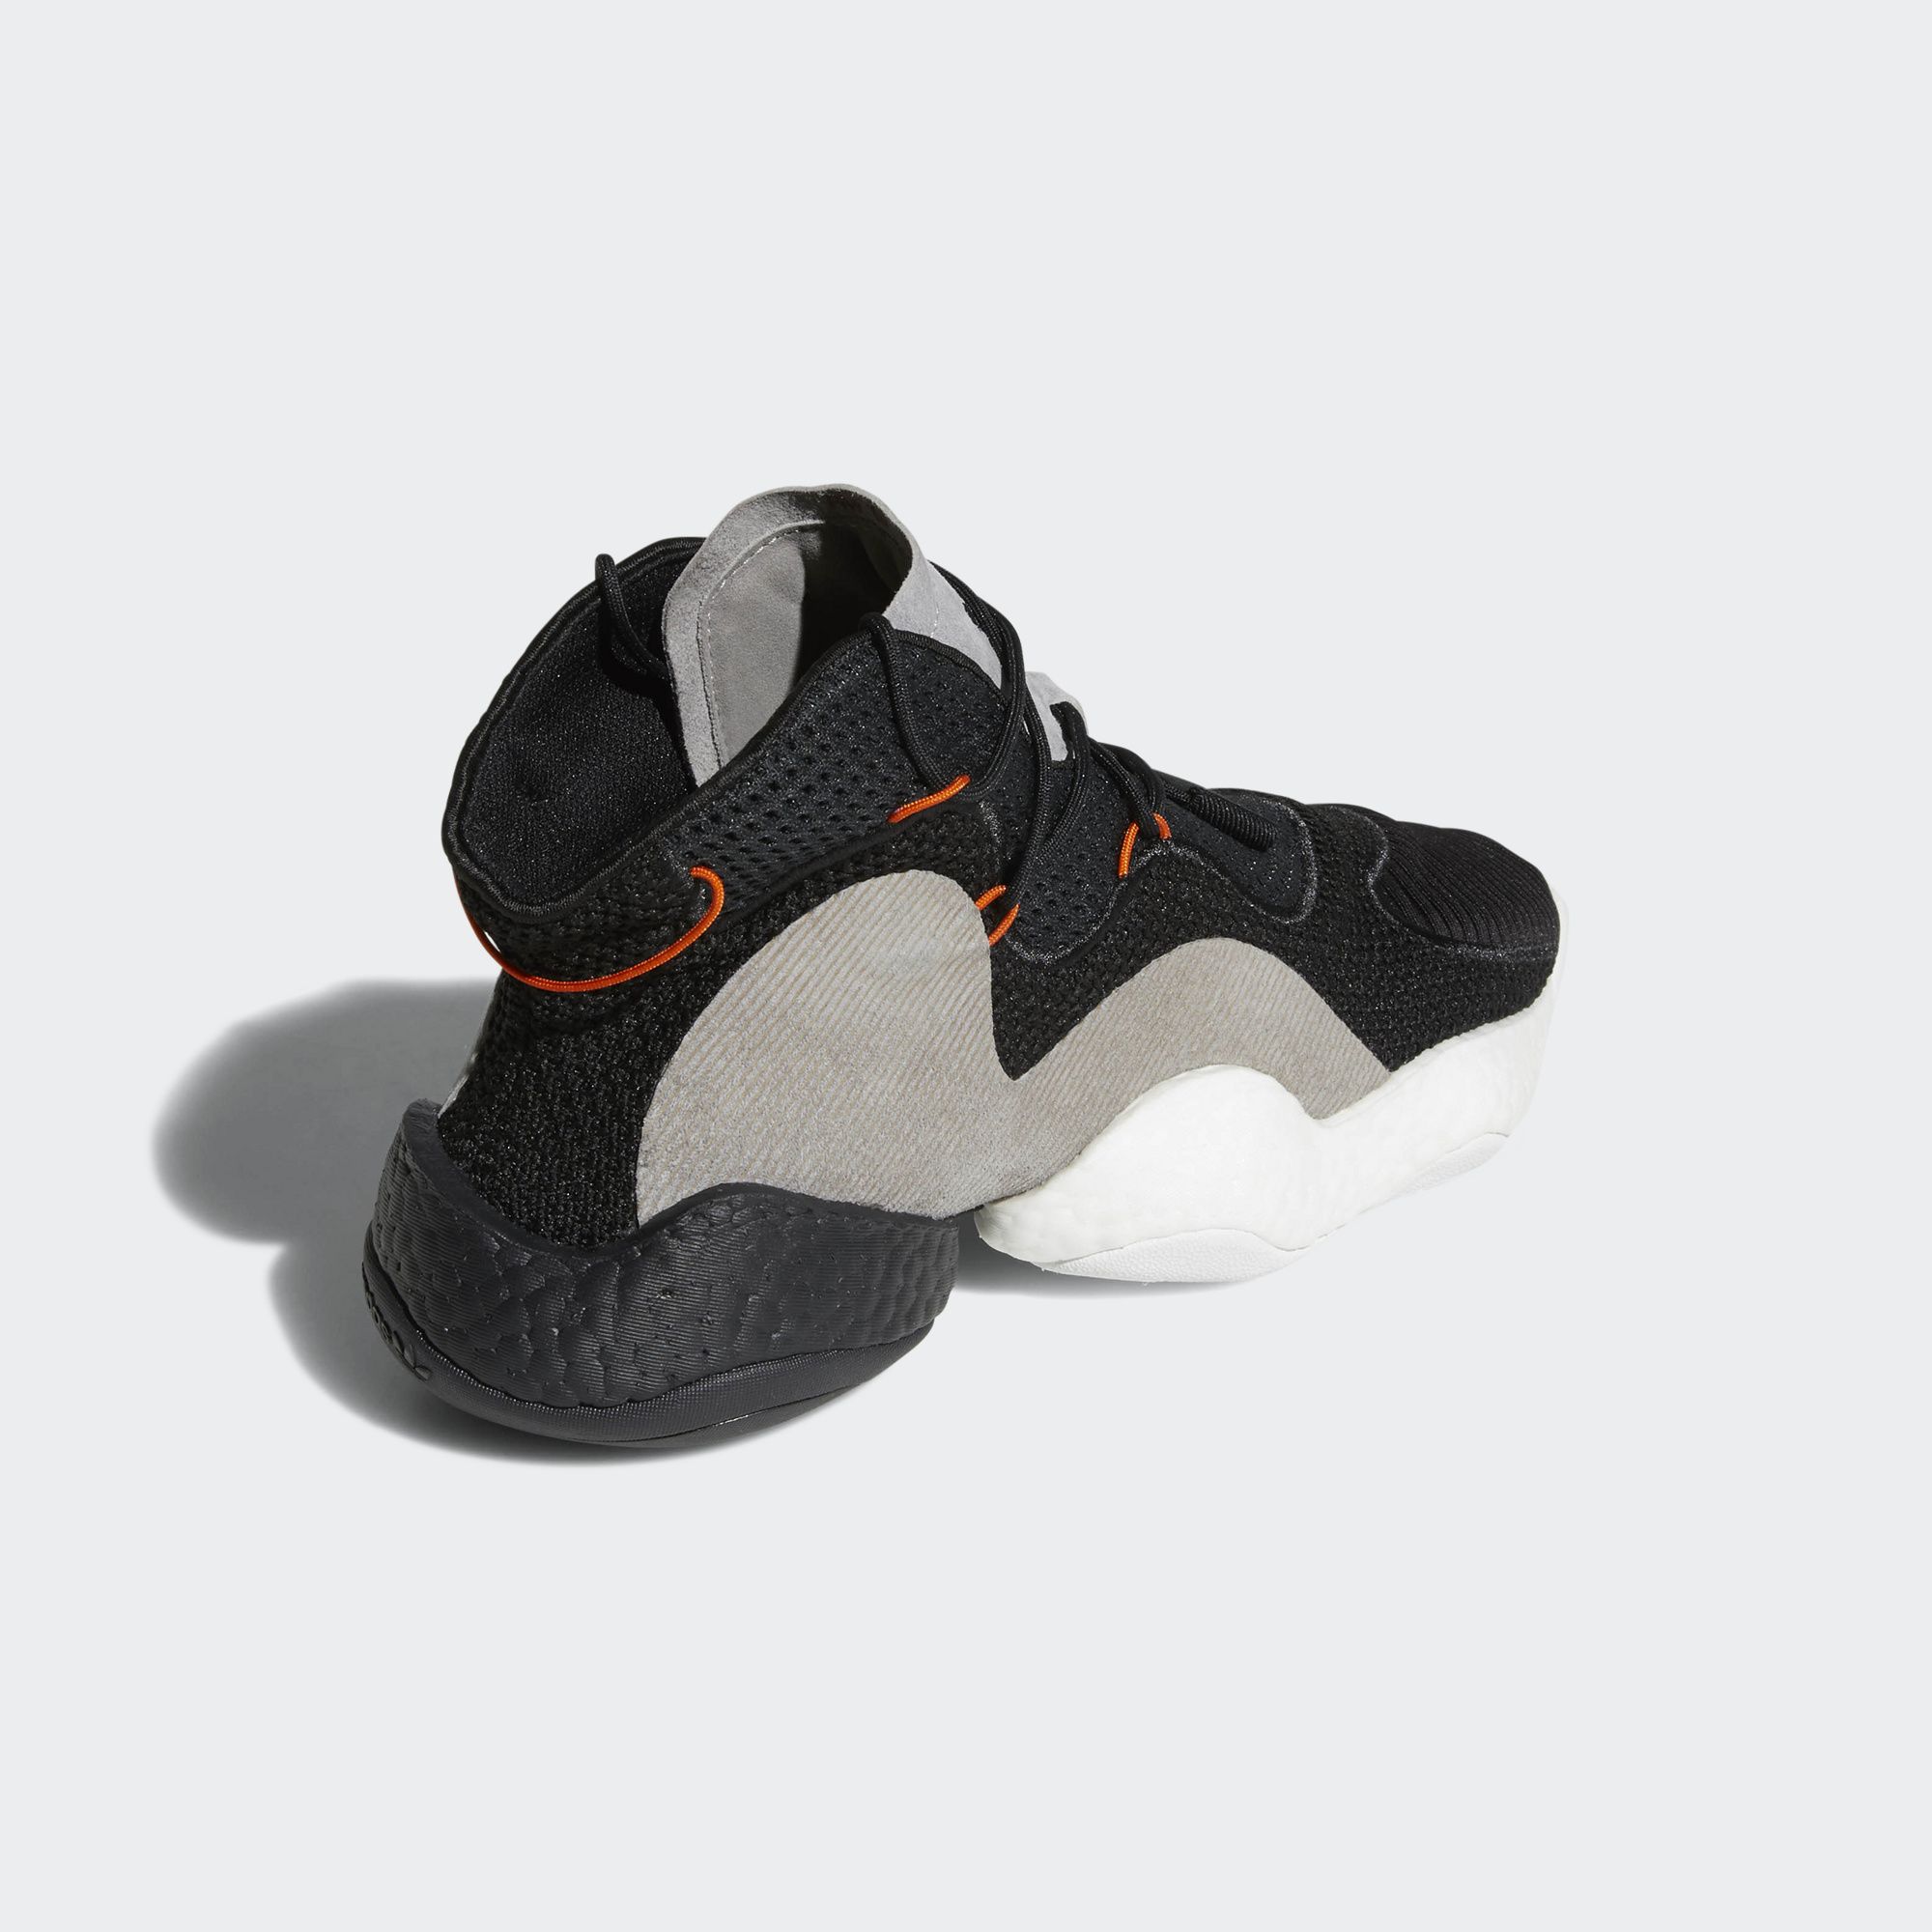 adidas Crazy BYW LVL 1  EVERYTHING YOU NEED TO KNOW 